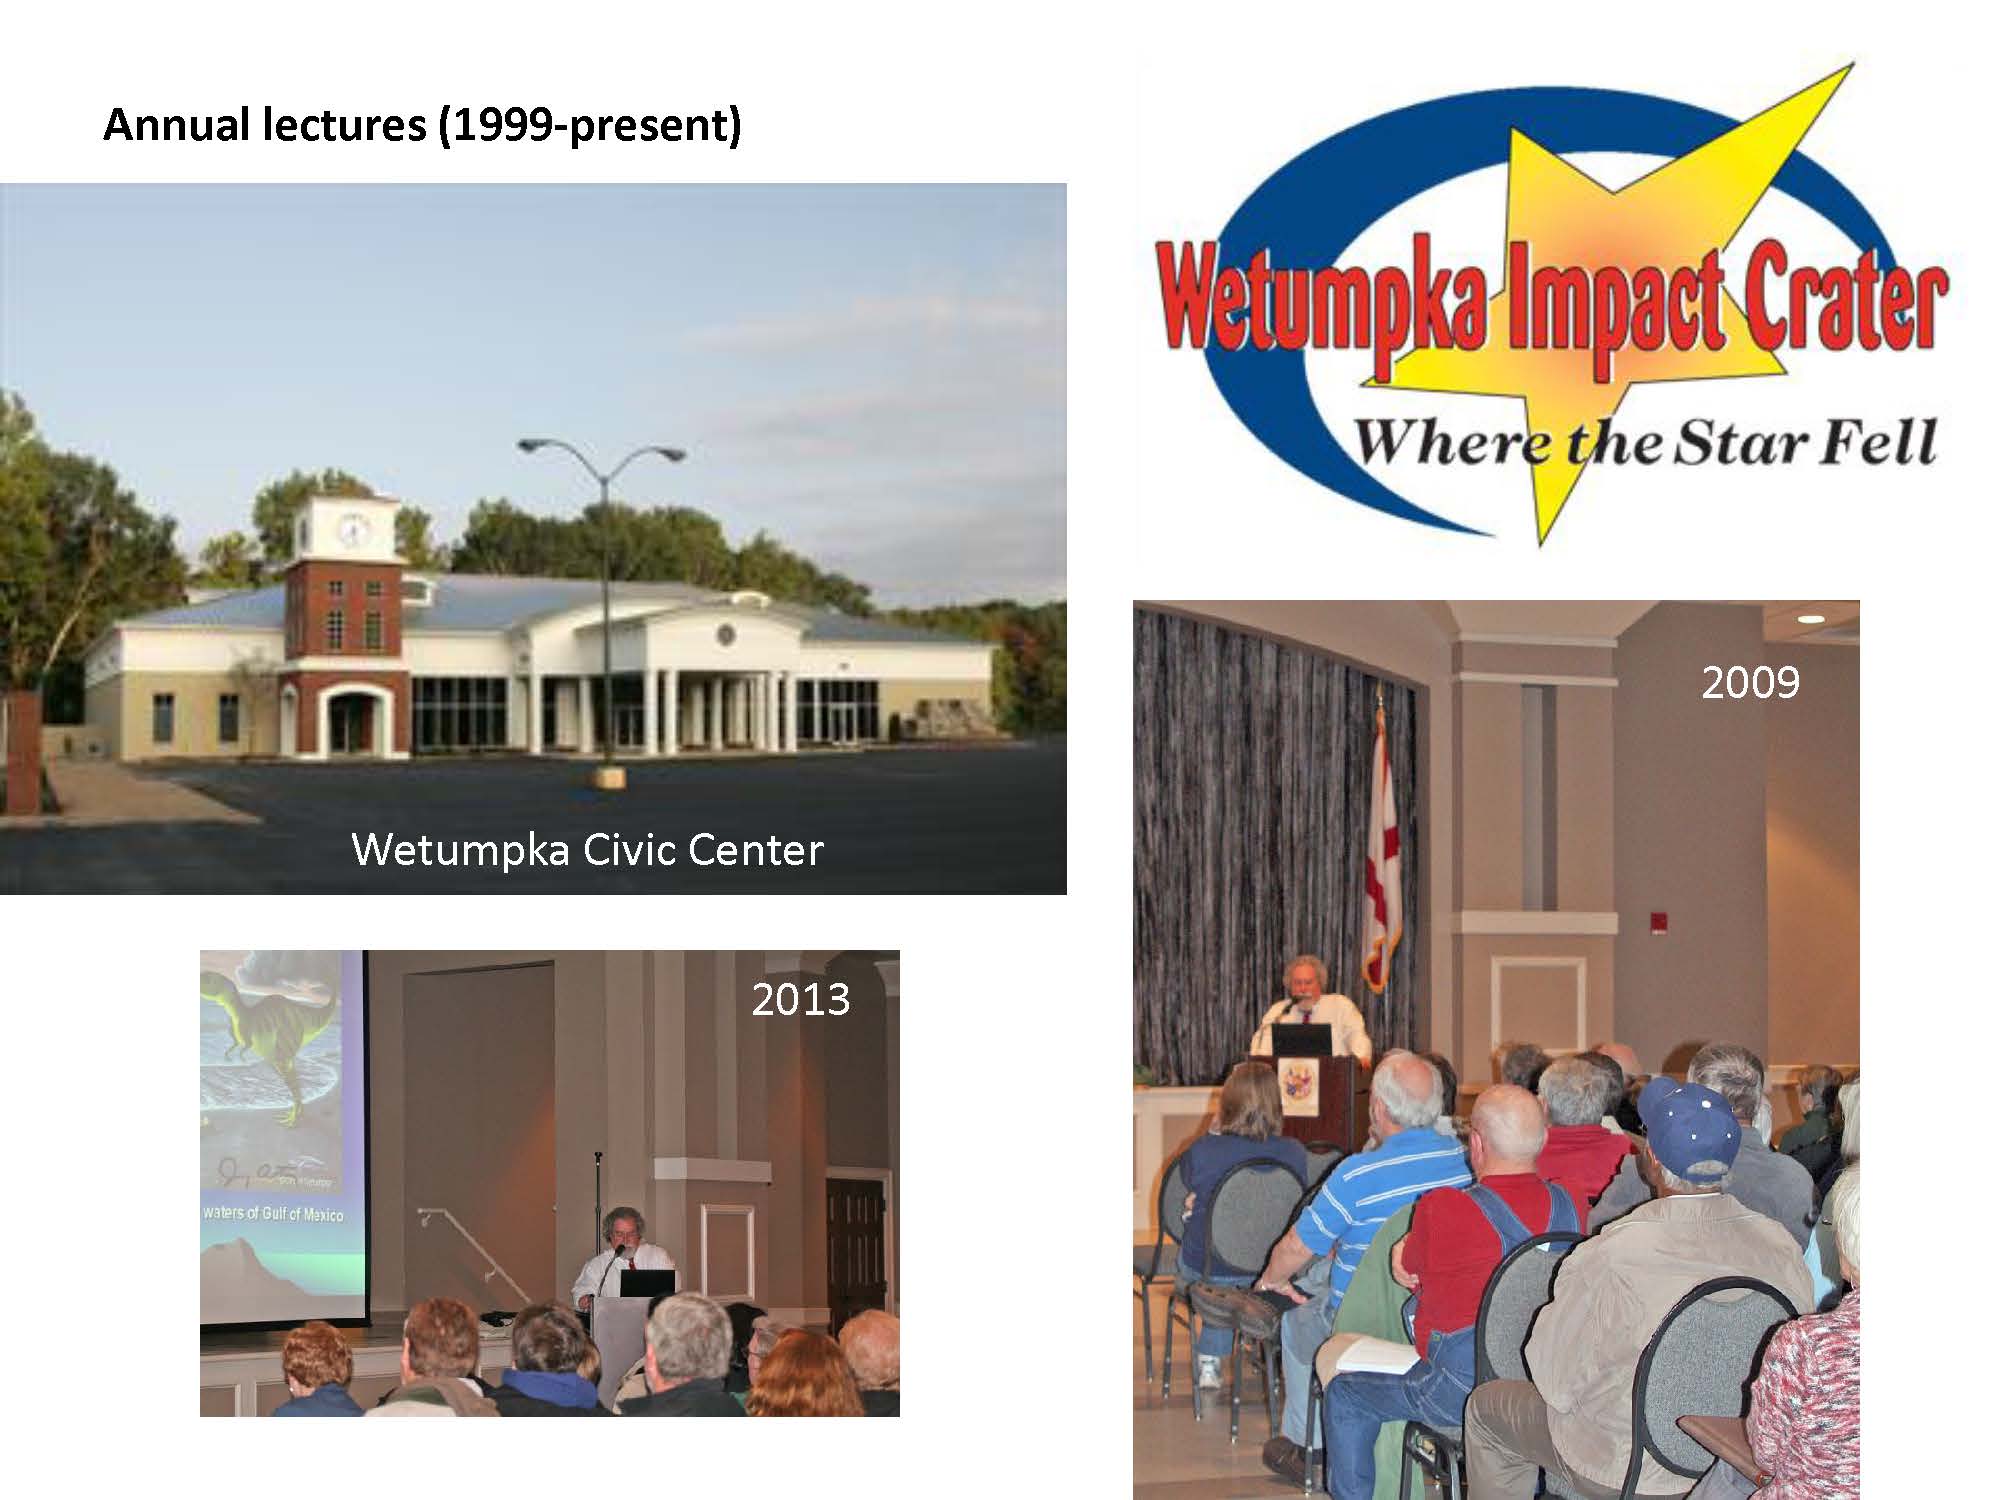 Wetumpka Civic Center and images from the annual lectures